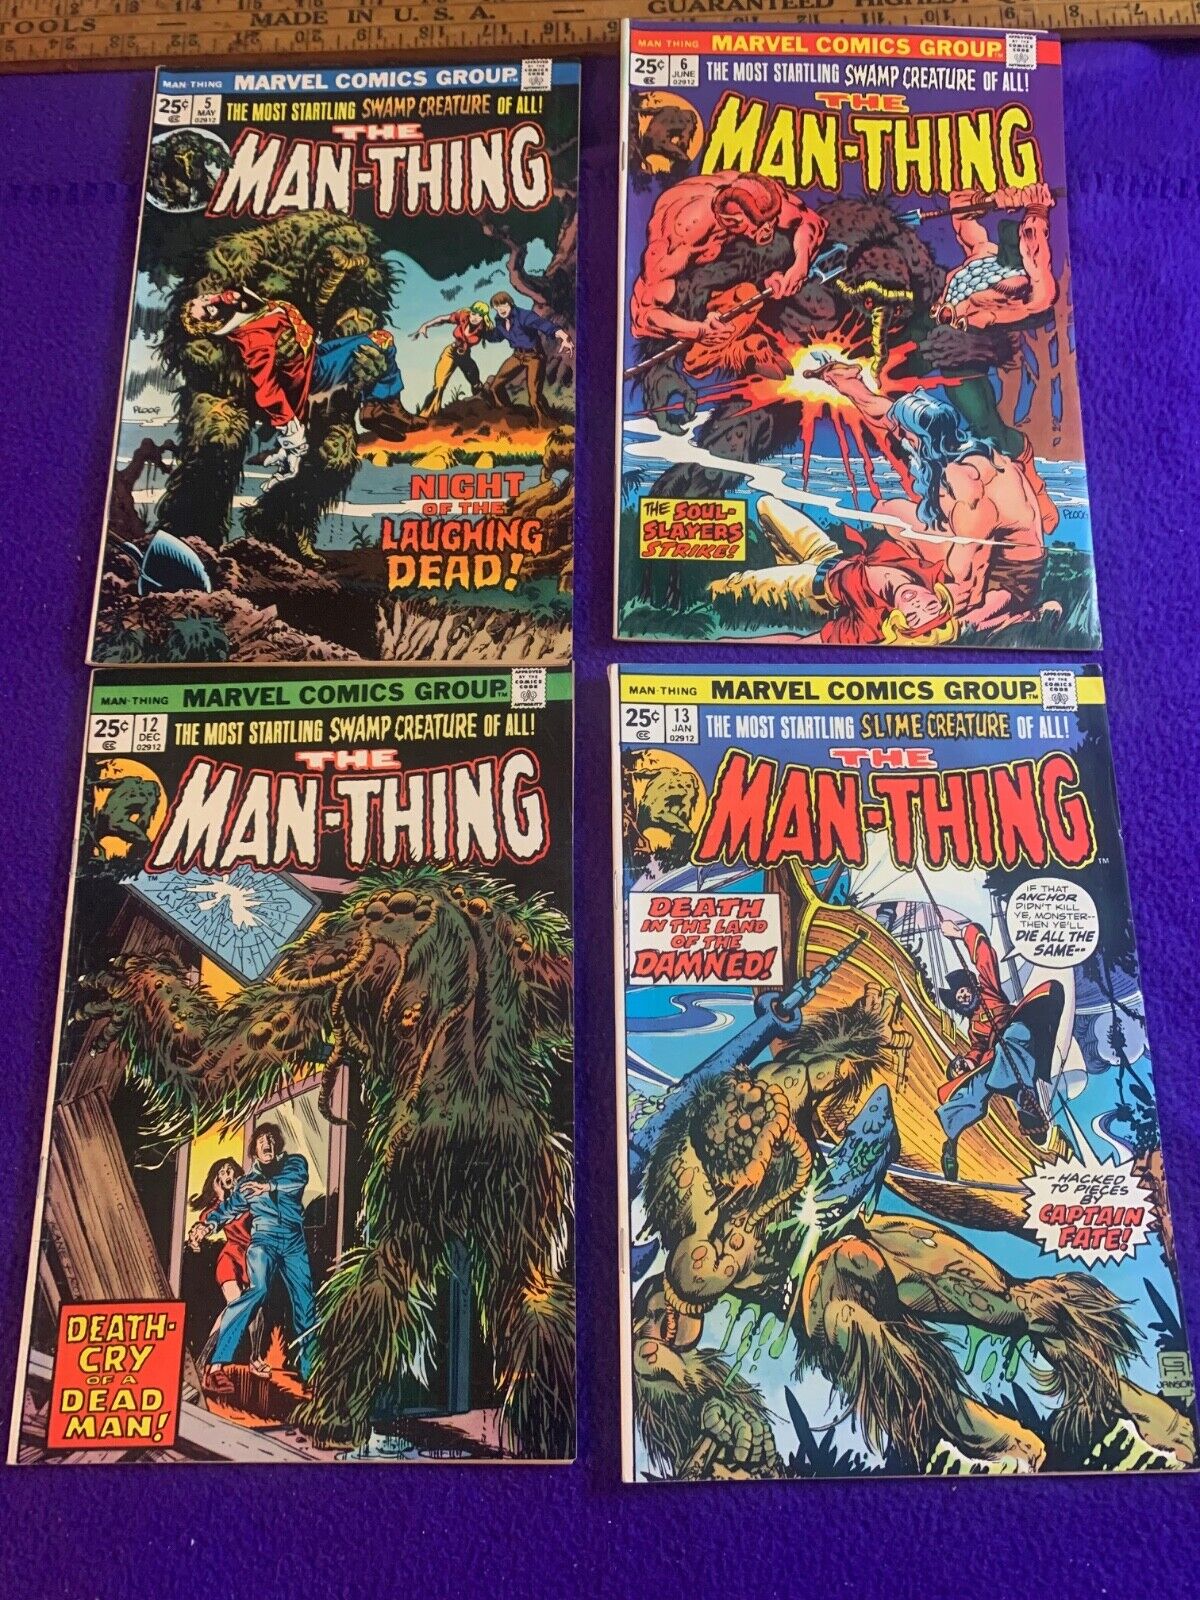 The Man Thing #5,6,12,13 excellent Marvel Comic books